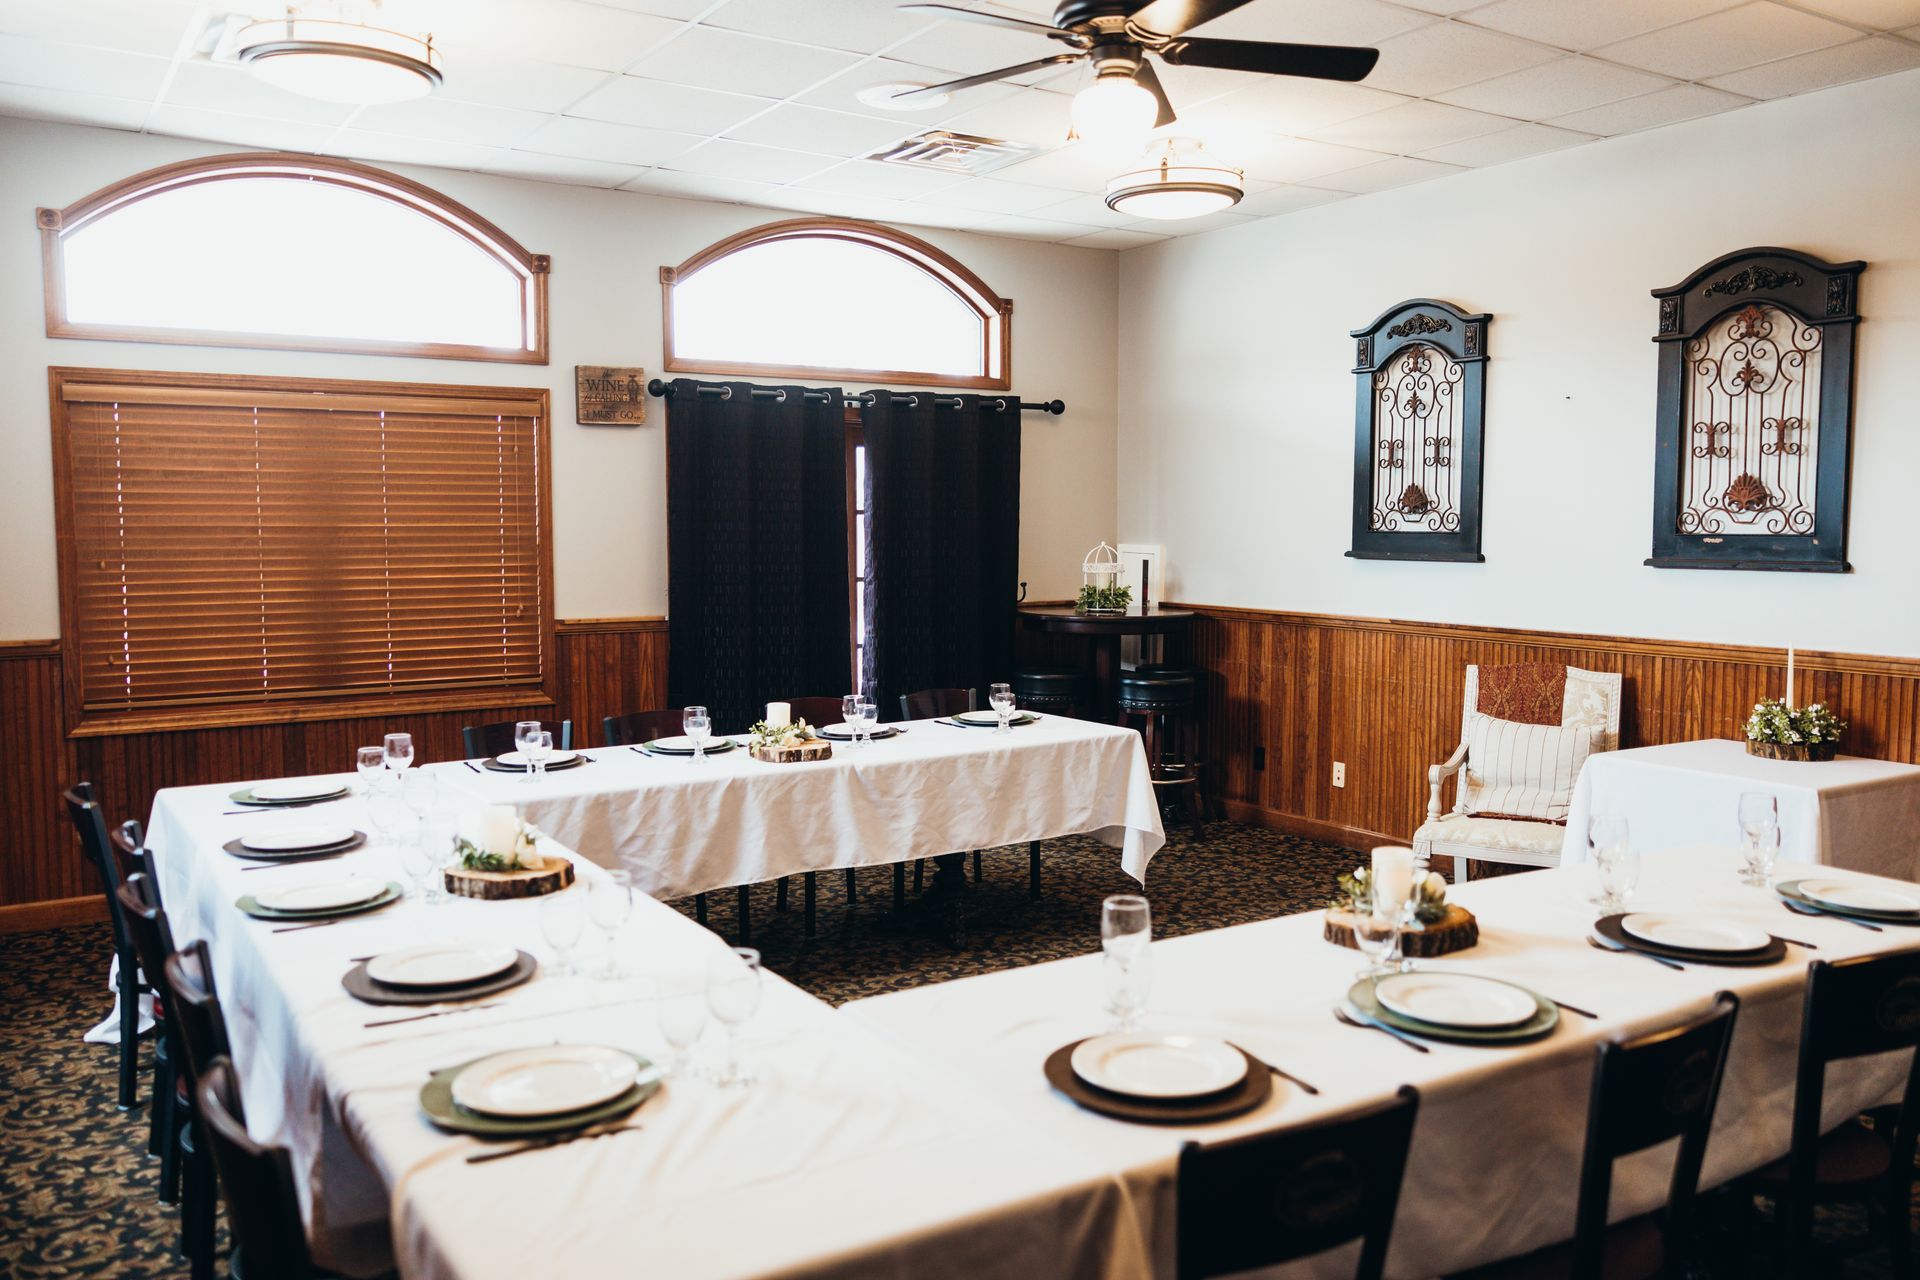 Gather Your Team or Family to Enjoy a Private Celebration at the Hill in Holts Summit, MO.